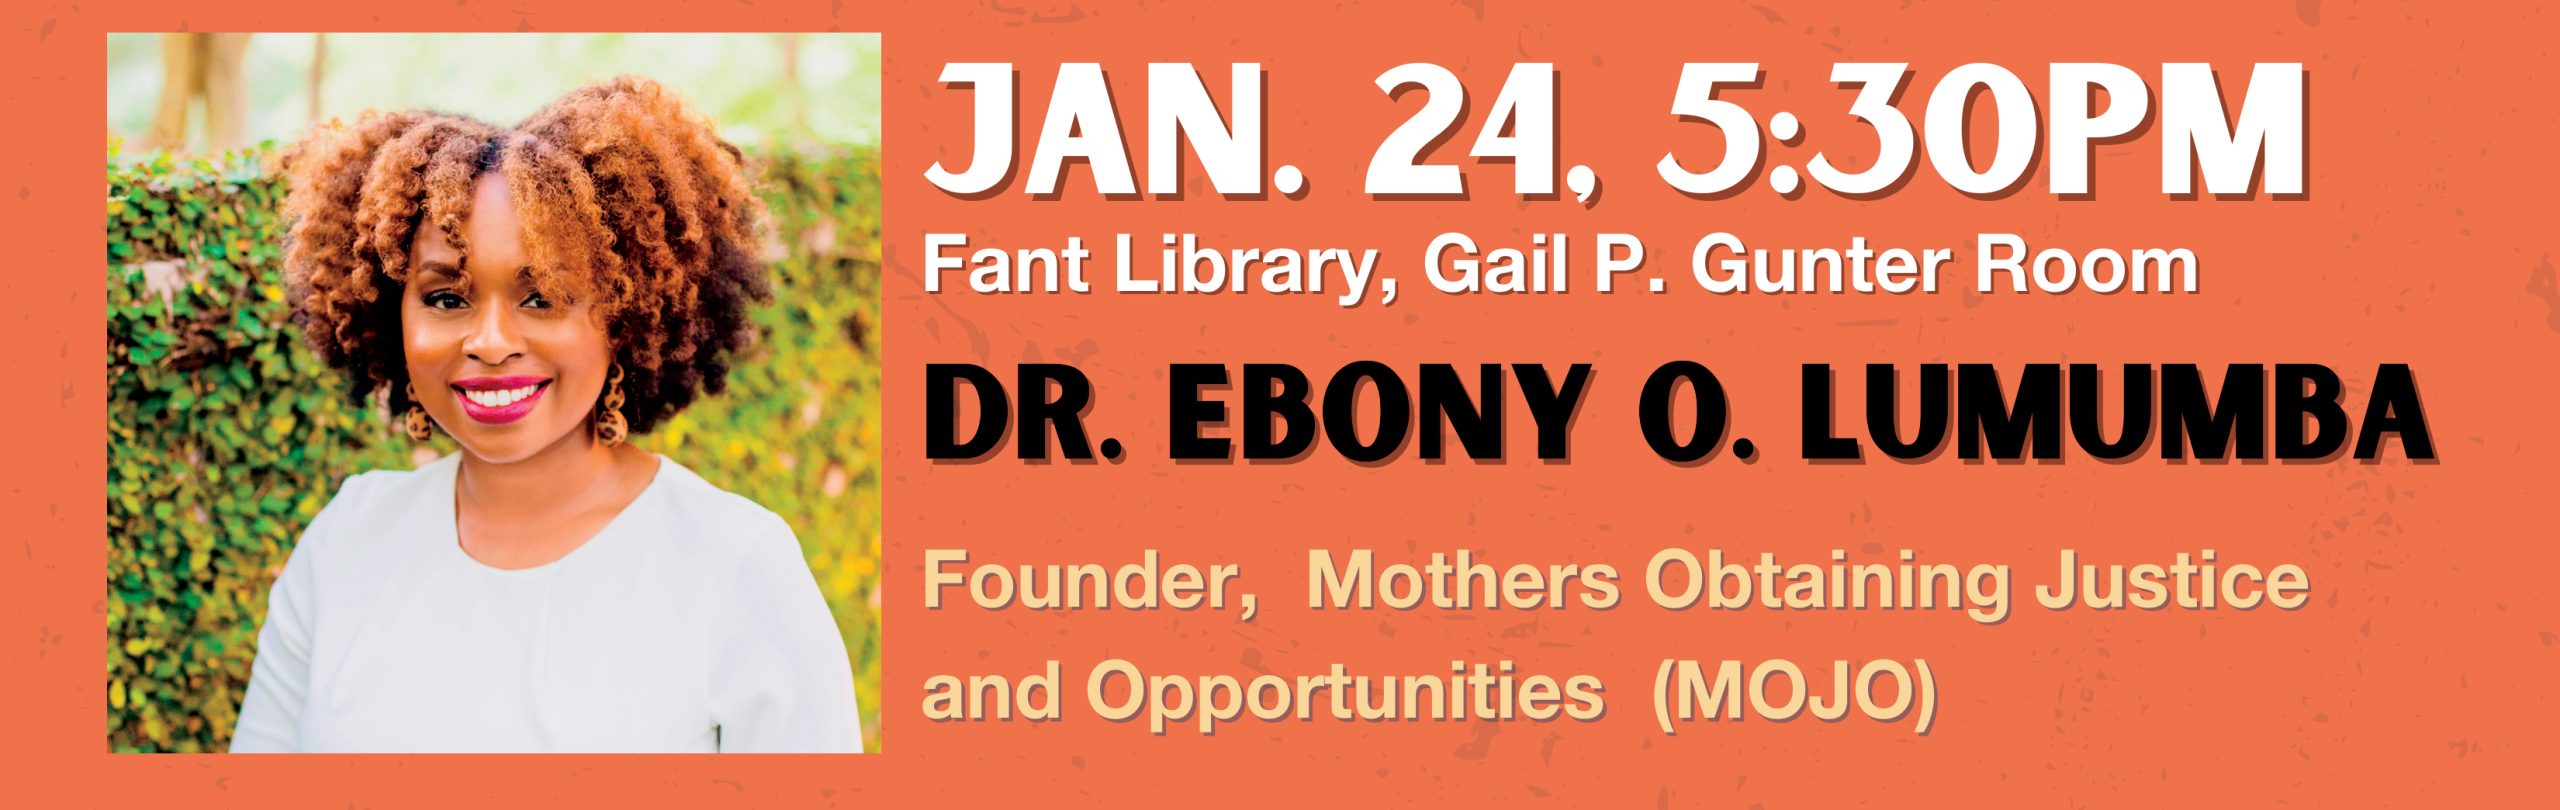 Jan 24 at 5:30 - Dr. Ebony O. Lumumba Founder, Mothers Obtaining Justice and Opportunities (MOJO)